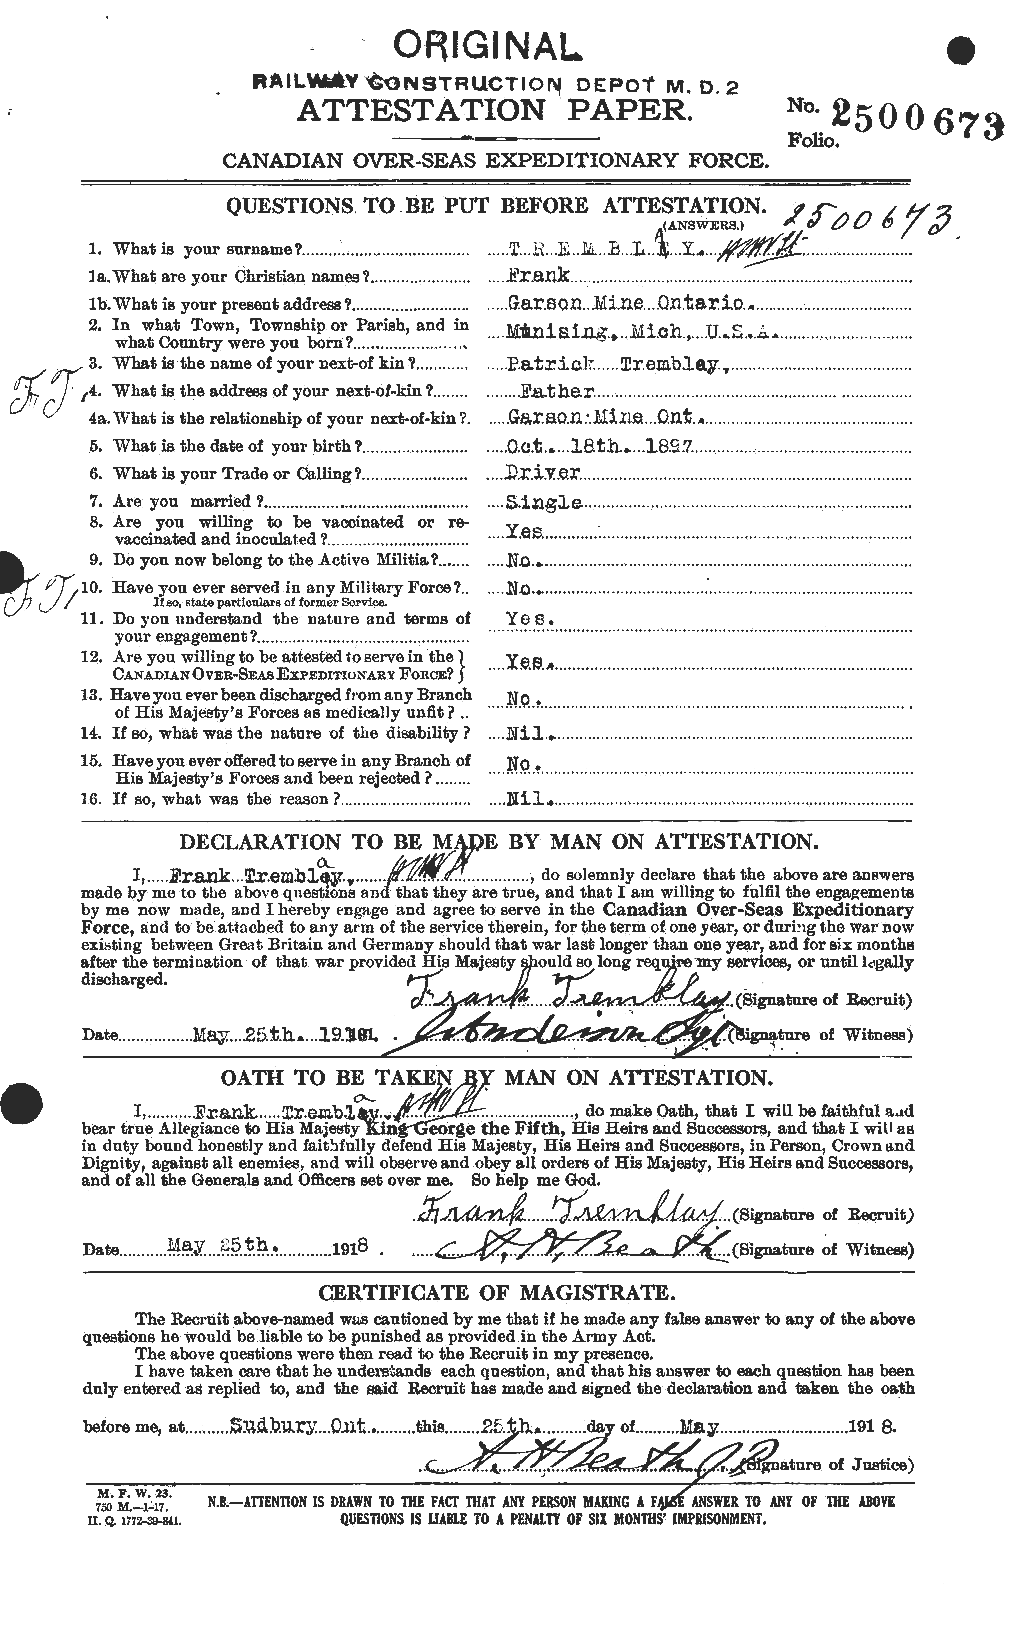 Personnel Records of the First World War - CEF 639050a